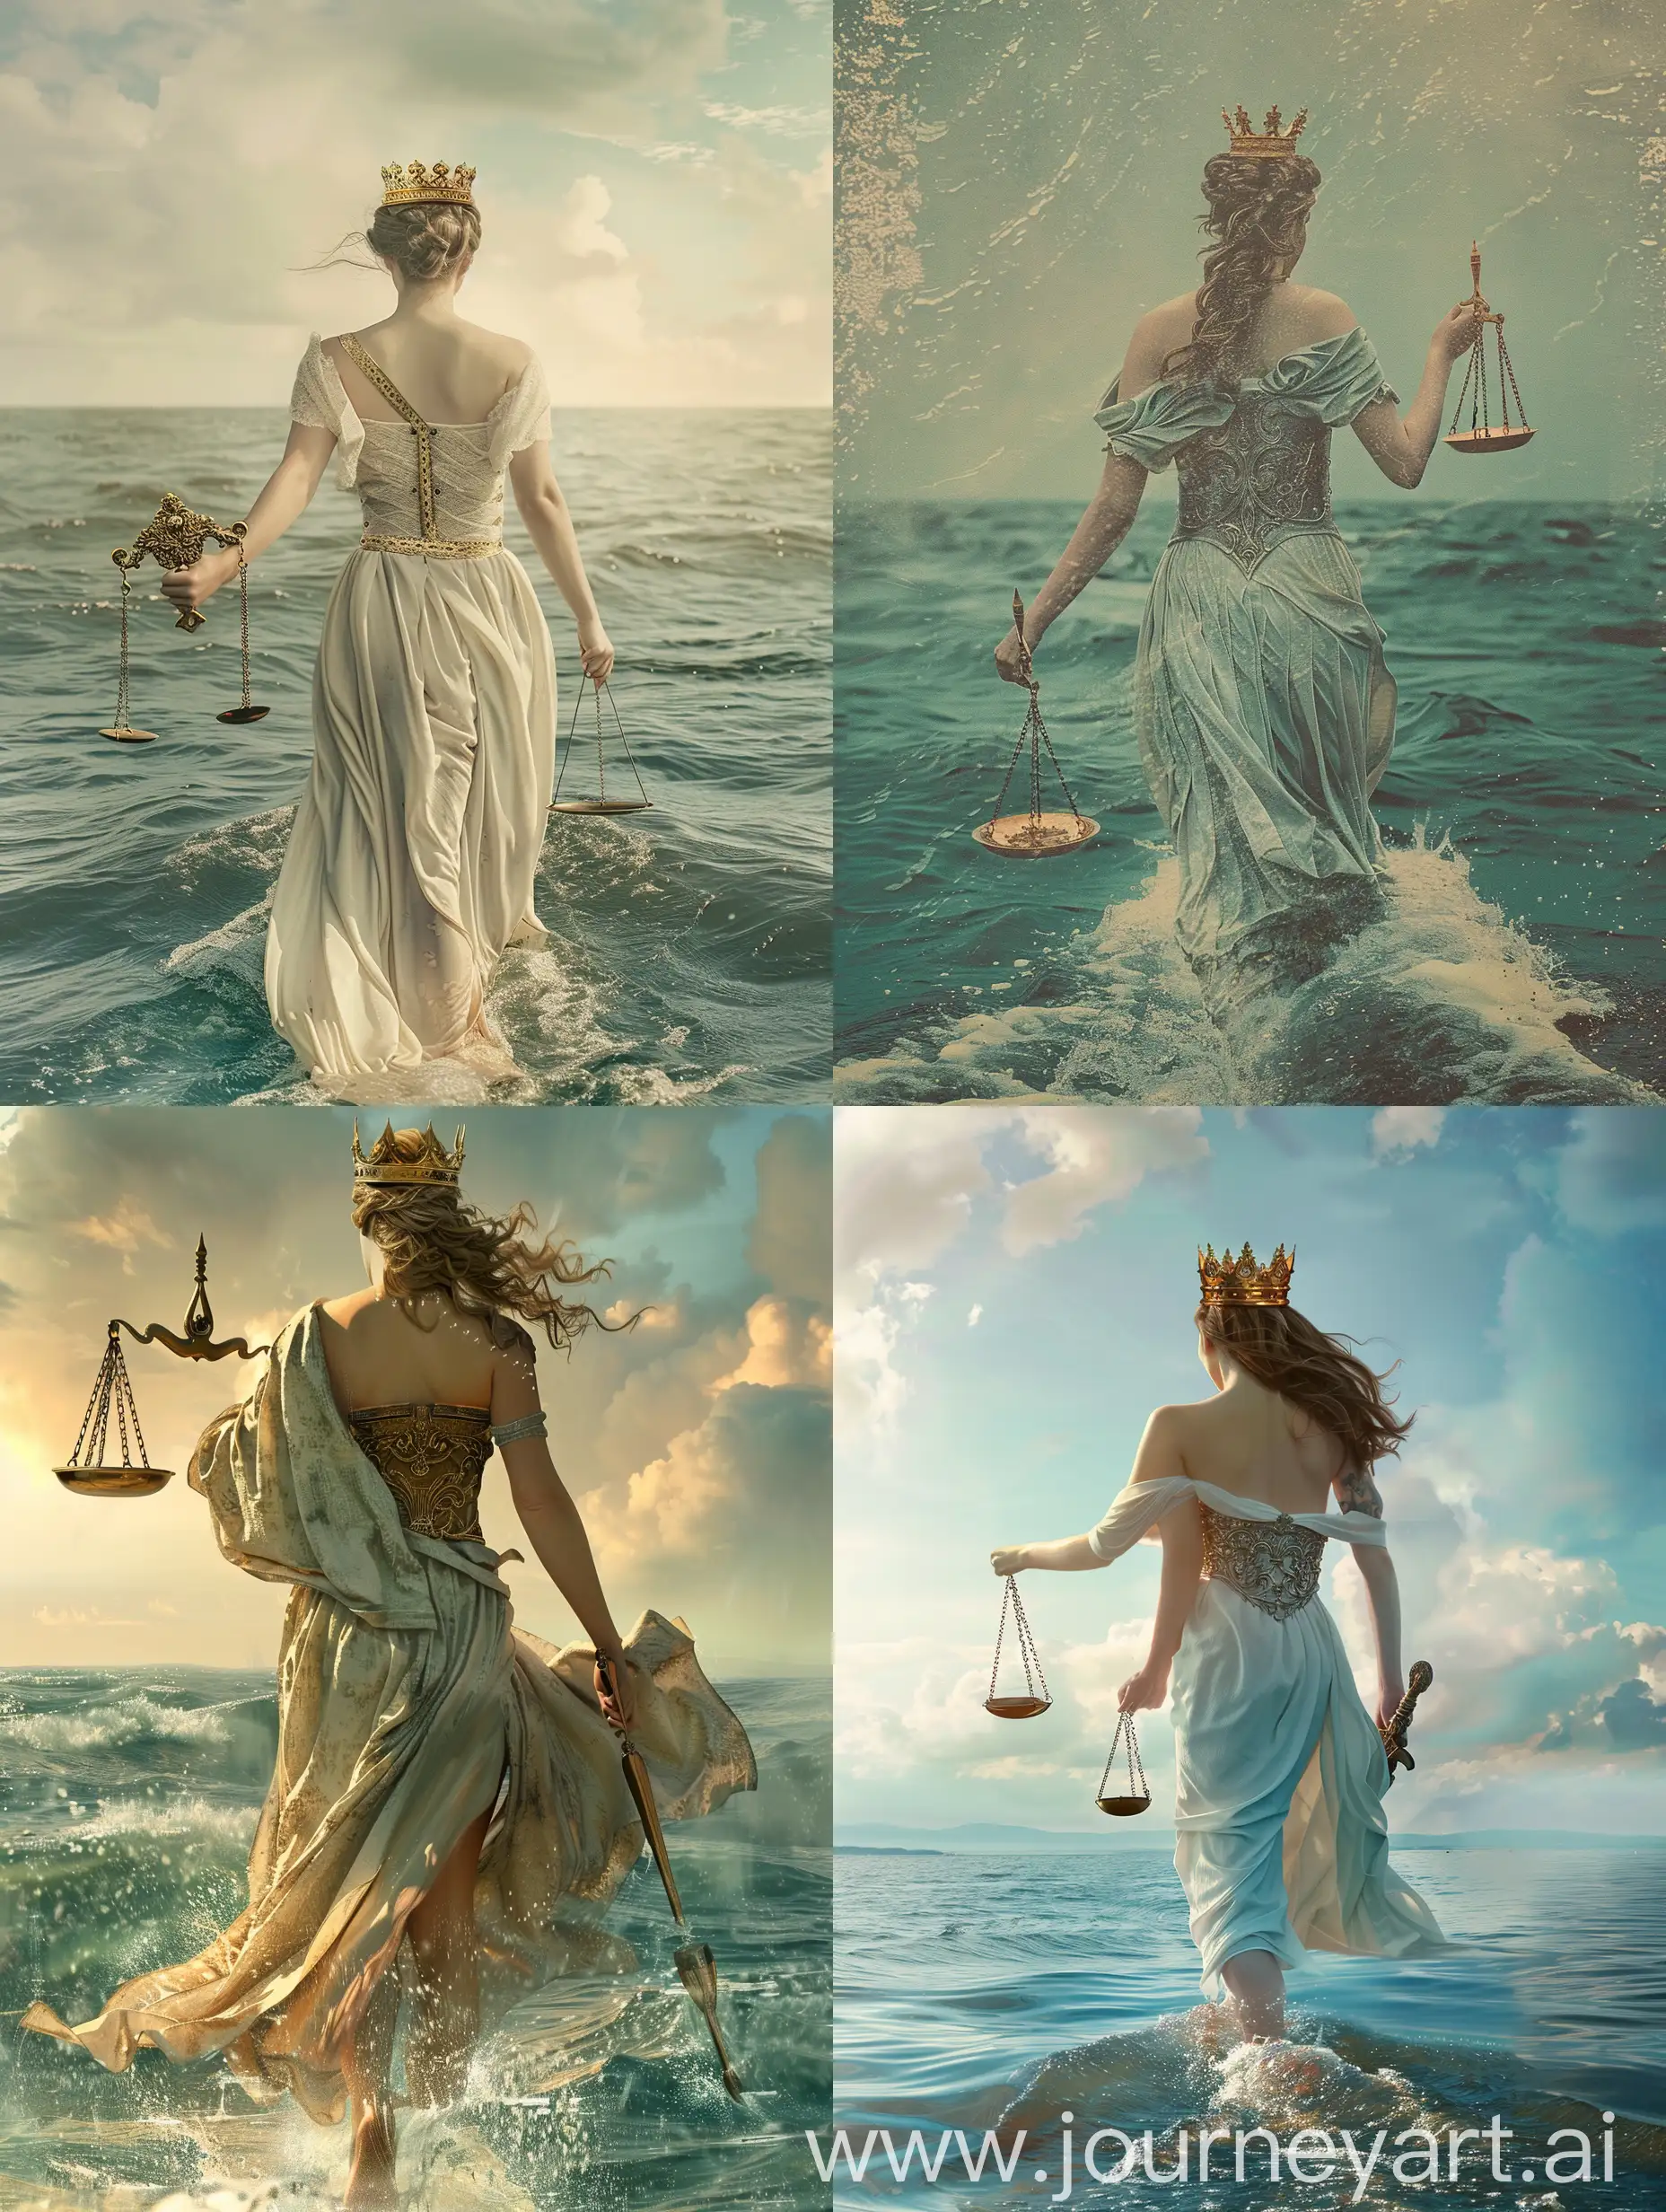 Woman-Holding-Scales-of-Justice-and-Crown-Walking-on-Seashore